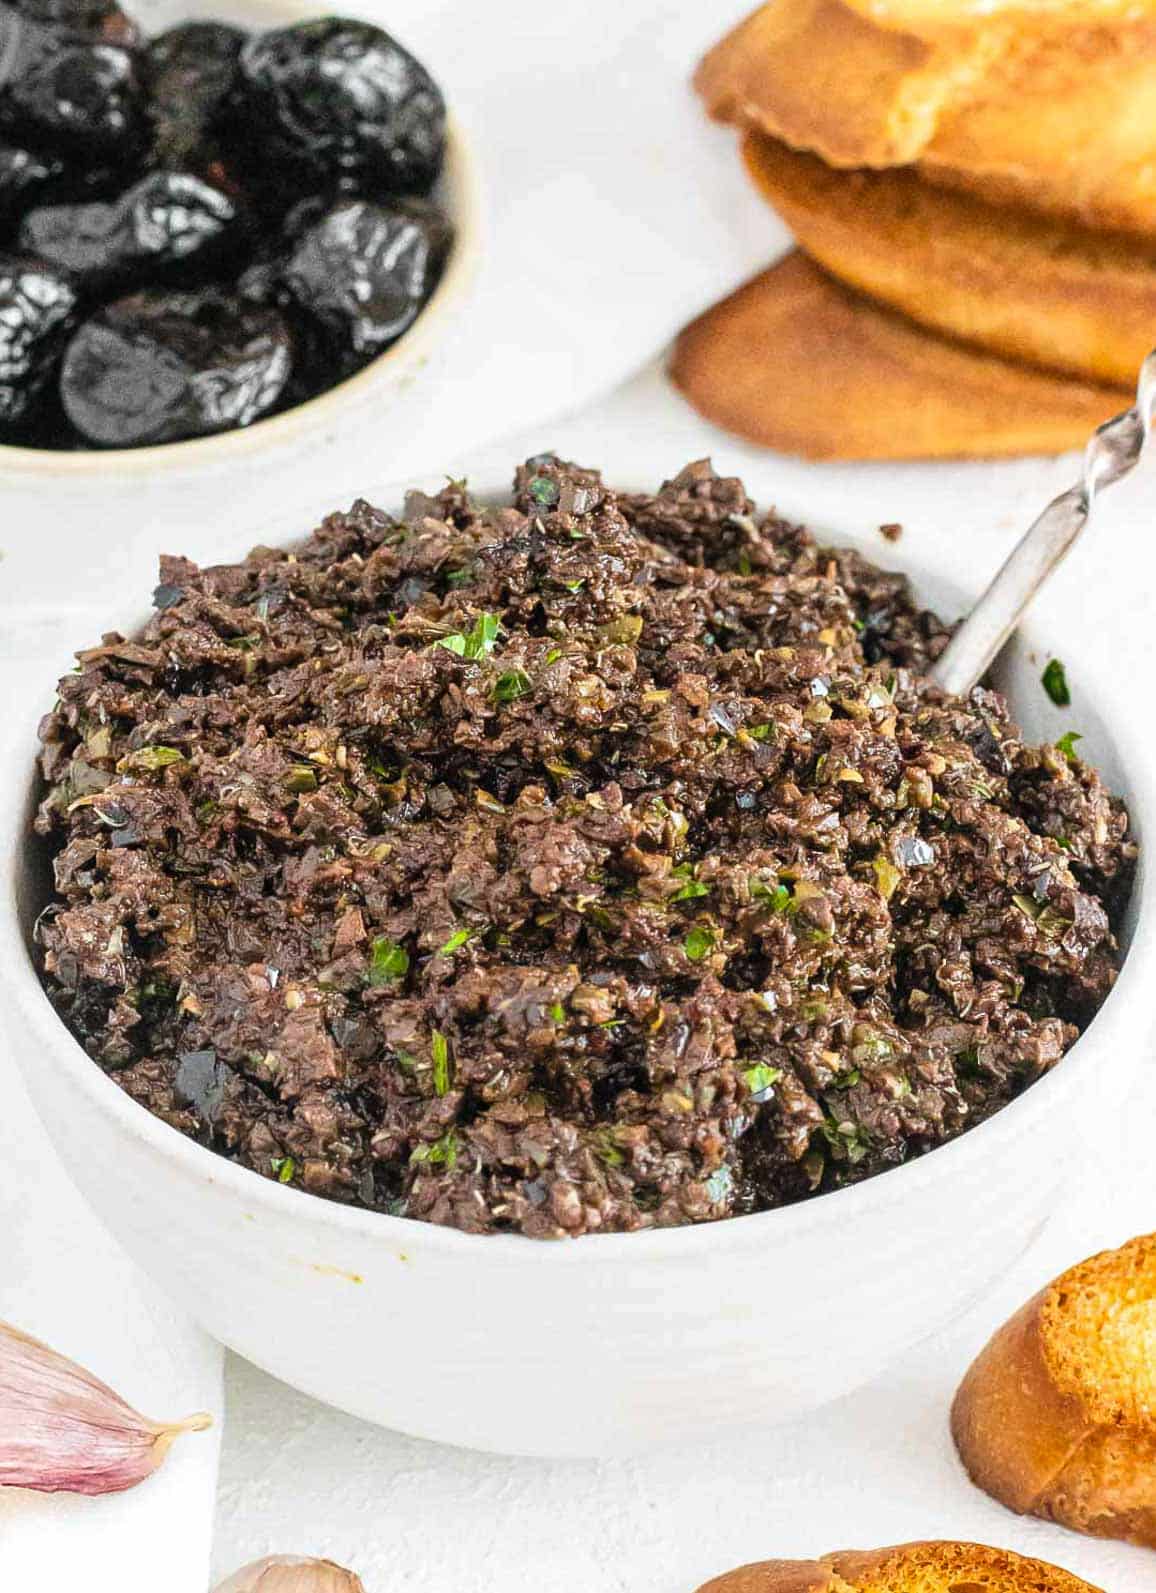 Olive tapenade in a white bowl